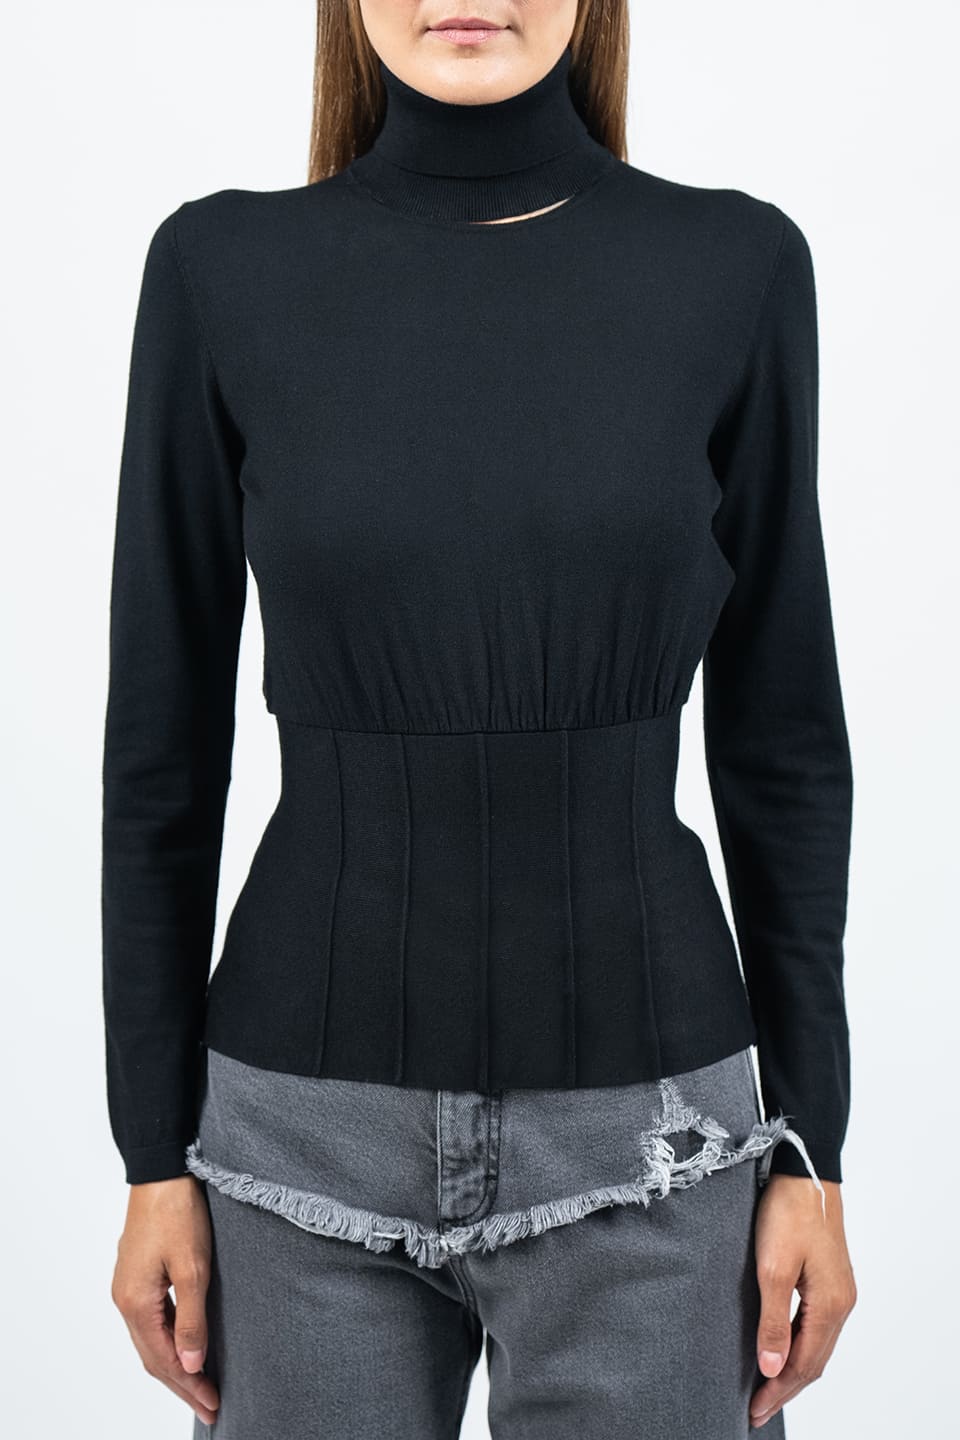 Shop online trendy Black Women long sleeve from Federica Tosi Fashion designer. Product gallery 1